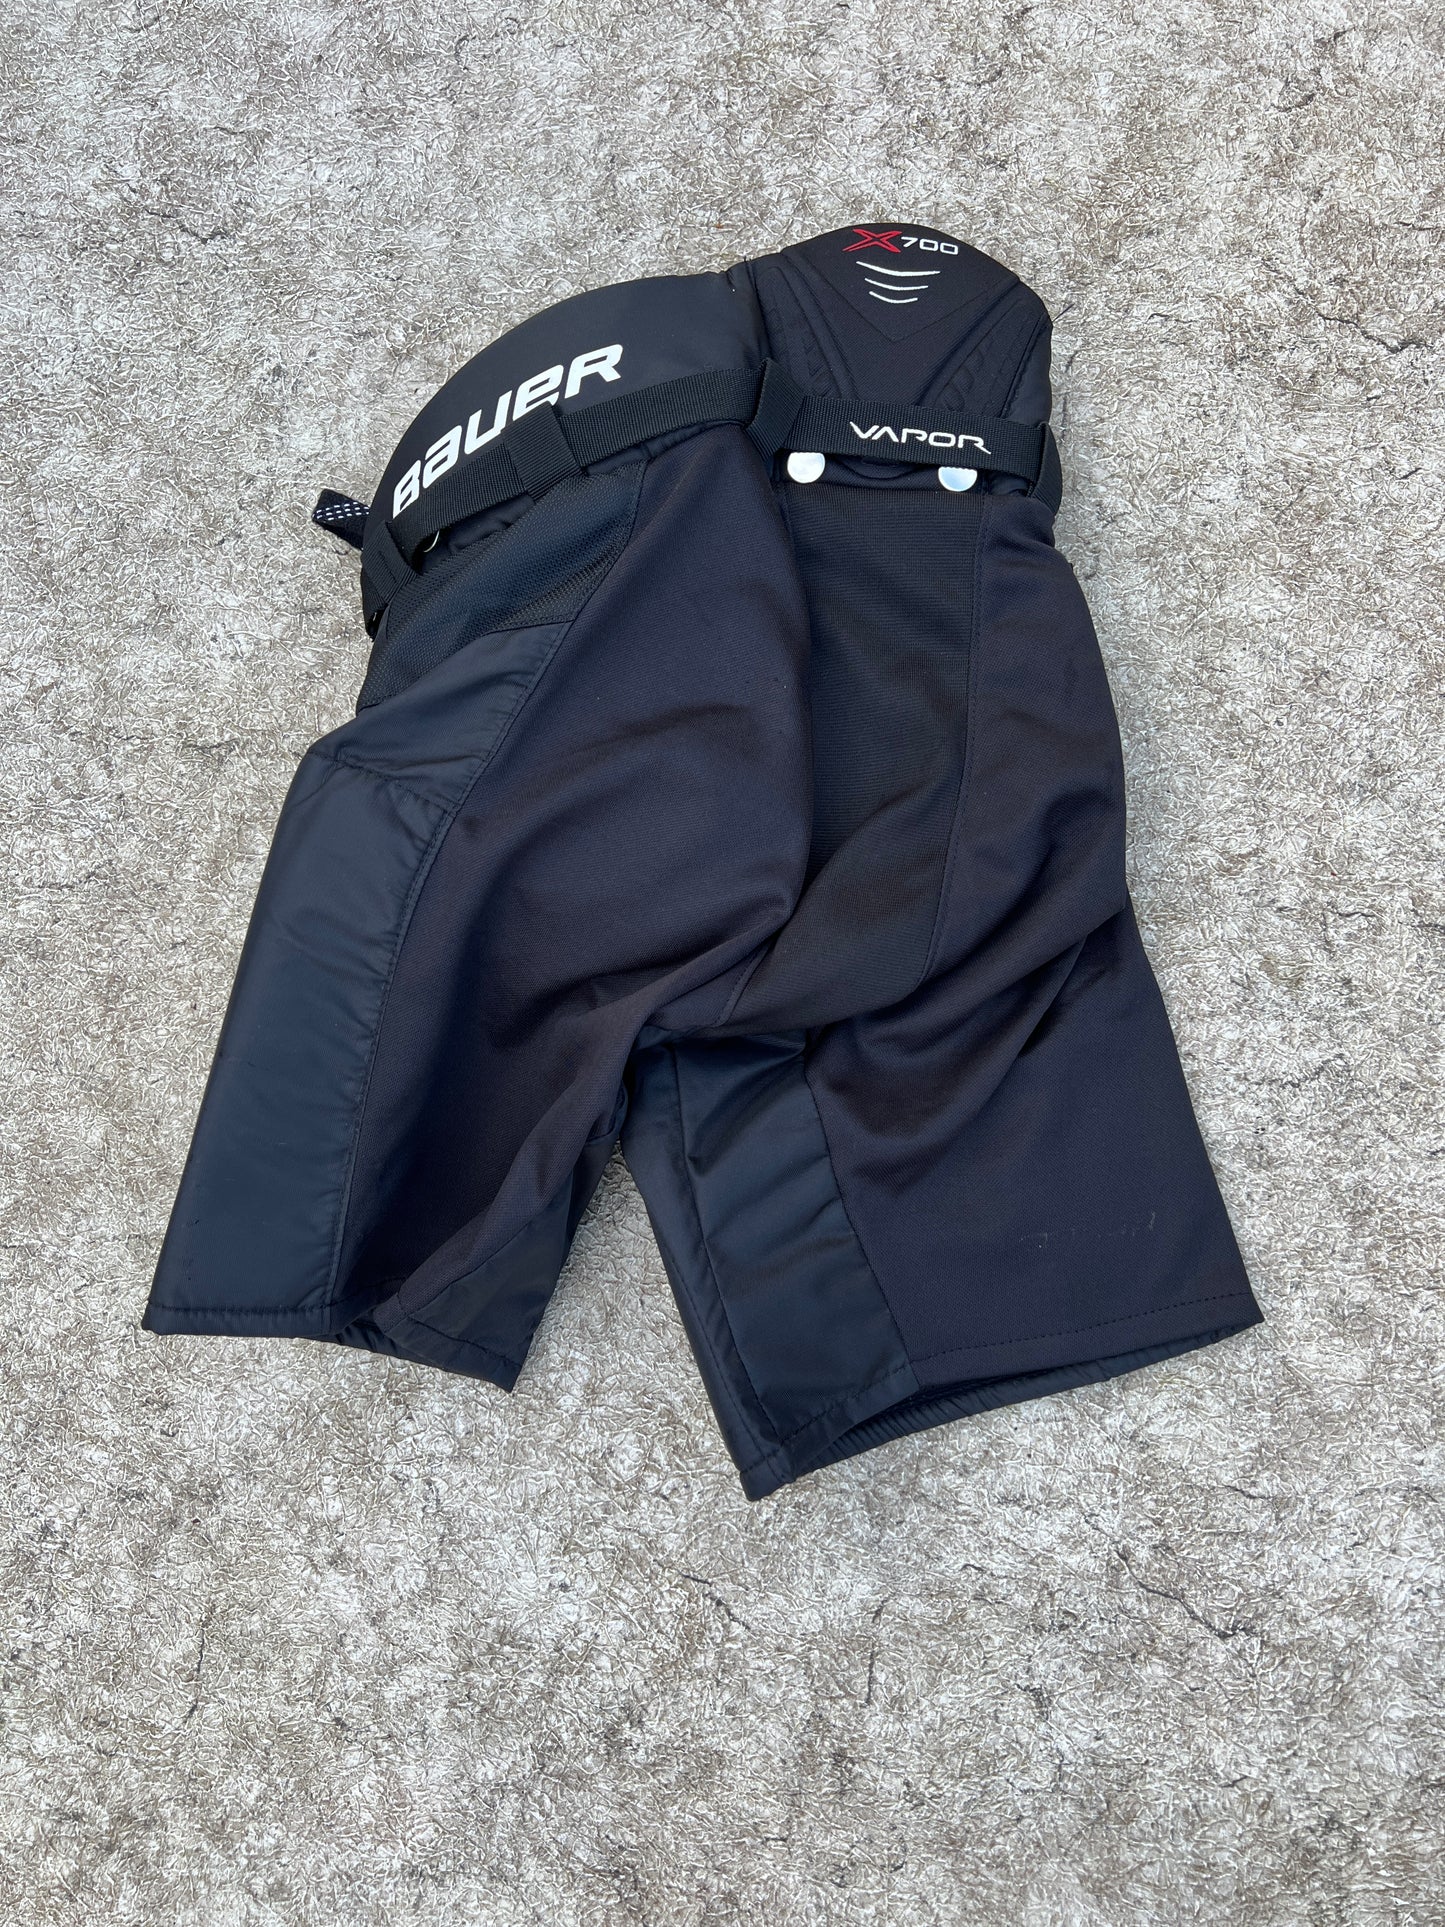 Hockey Pants Child Size Junior Small Age 6-8 Bauer Vapor X700 Outstanding Quality Like New